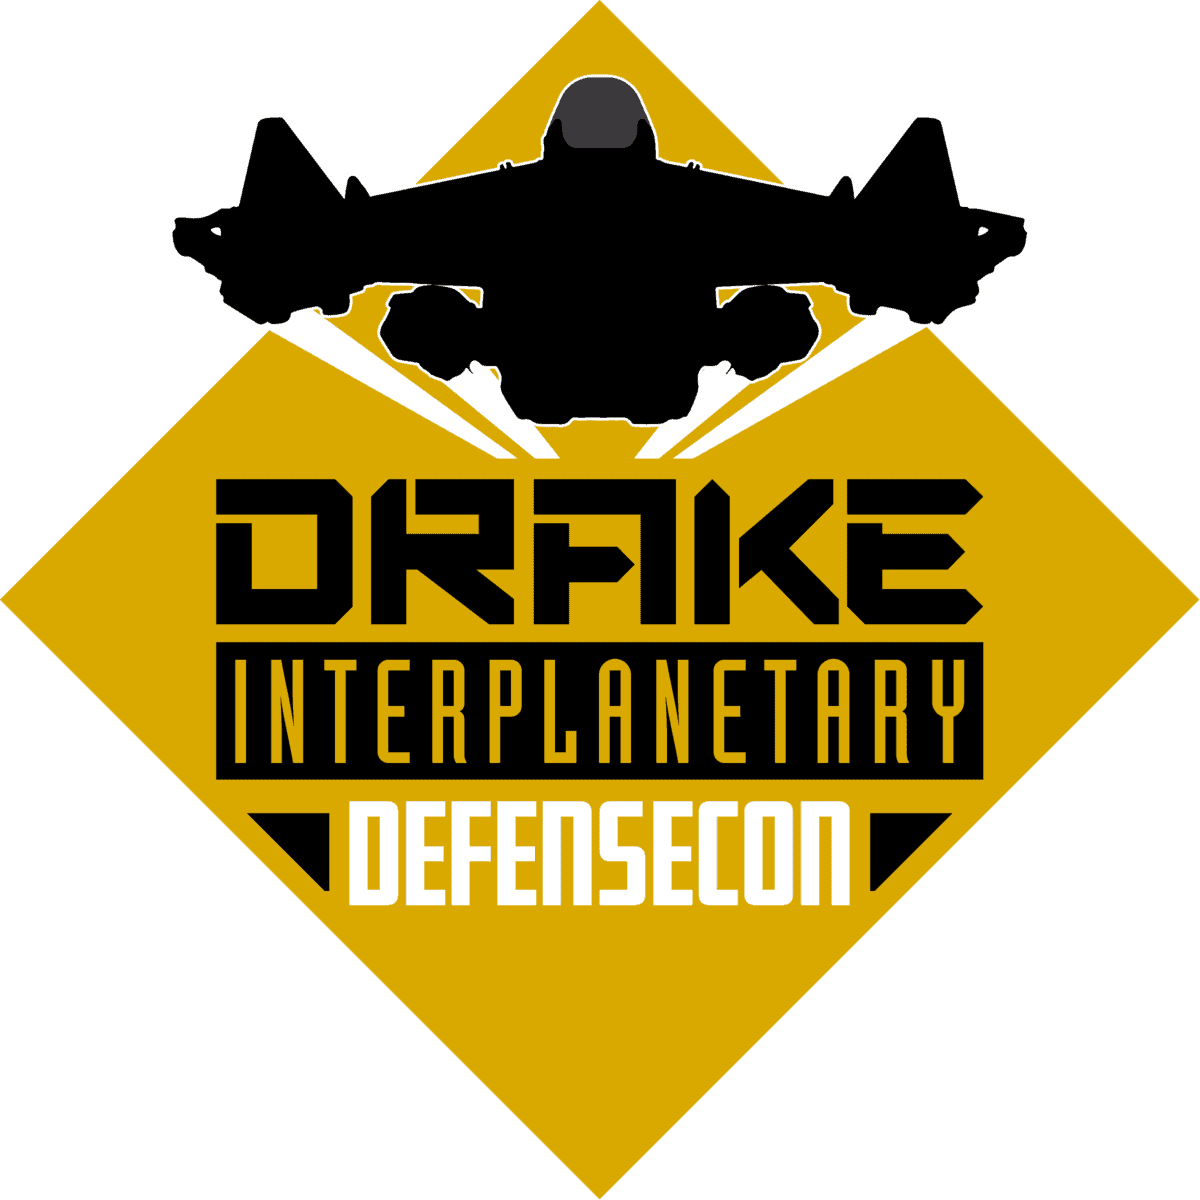 Exclusion of Drake Interplanetary from Invictus Fleet Week: Impact and Importance of Inclusion